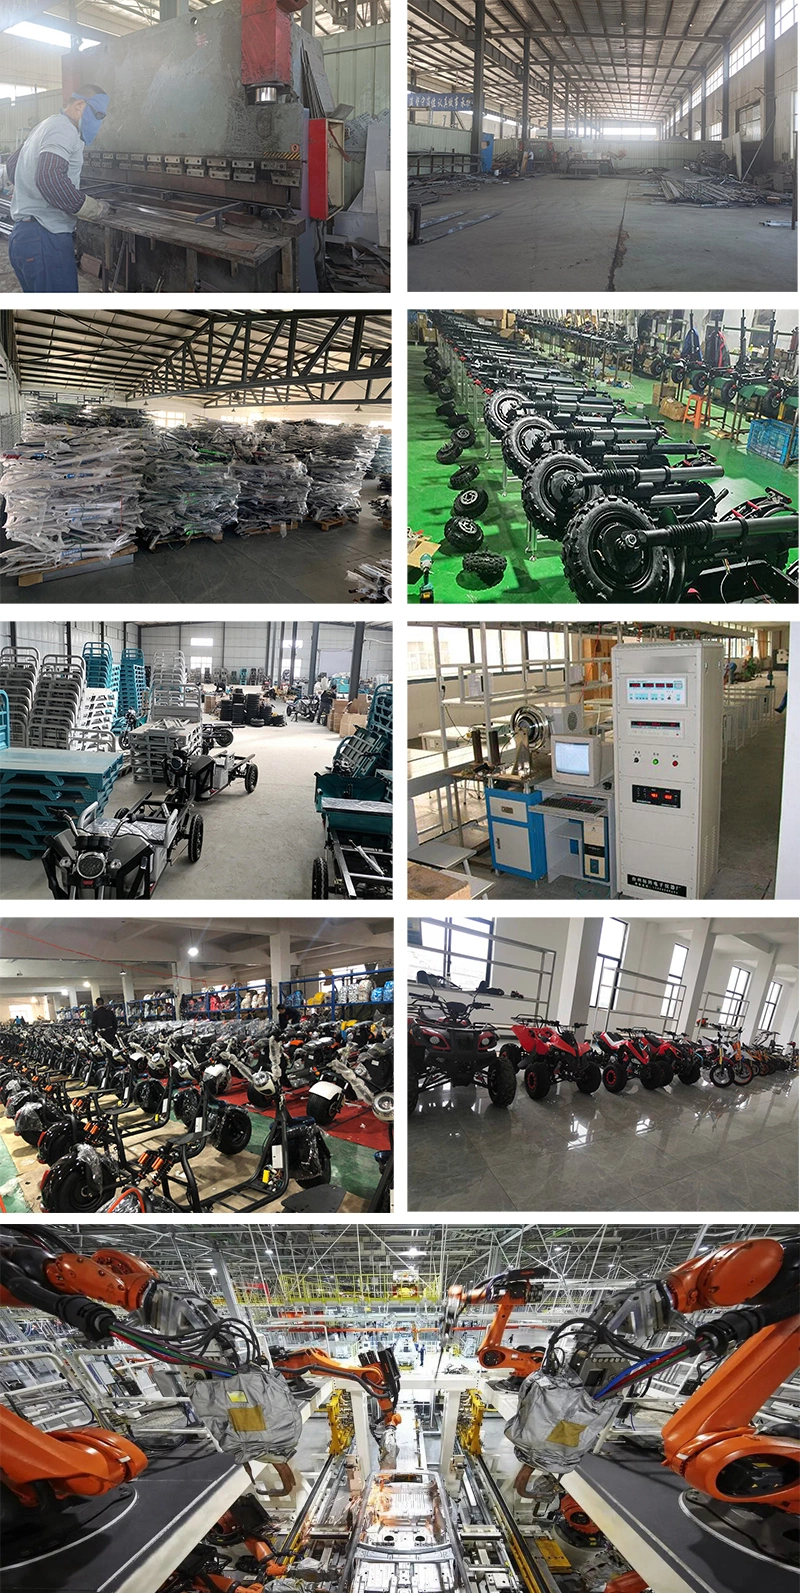 Wheel 3 Scooter for Kavaki Lower Cost Express Car Closed Disabled 48V Mining Dumper Trike Triciclos Motorized Electric Tricycle